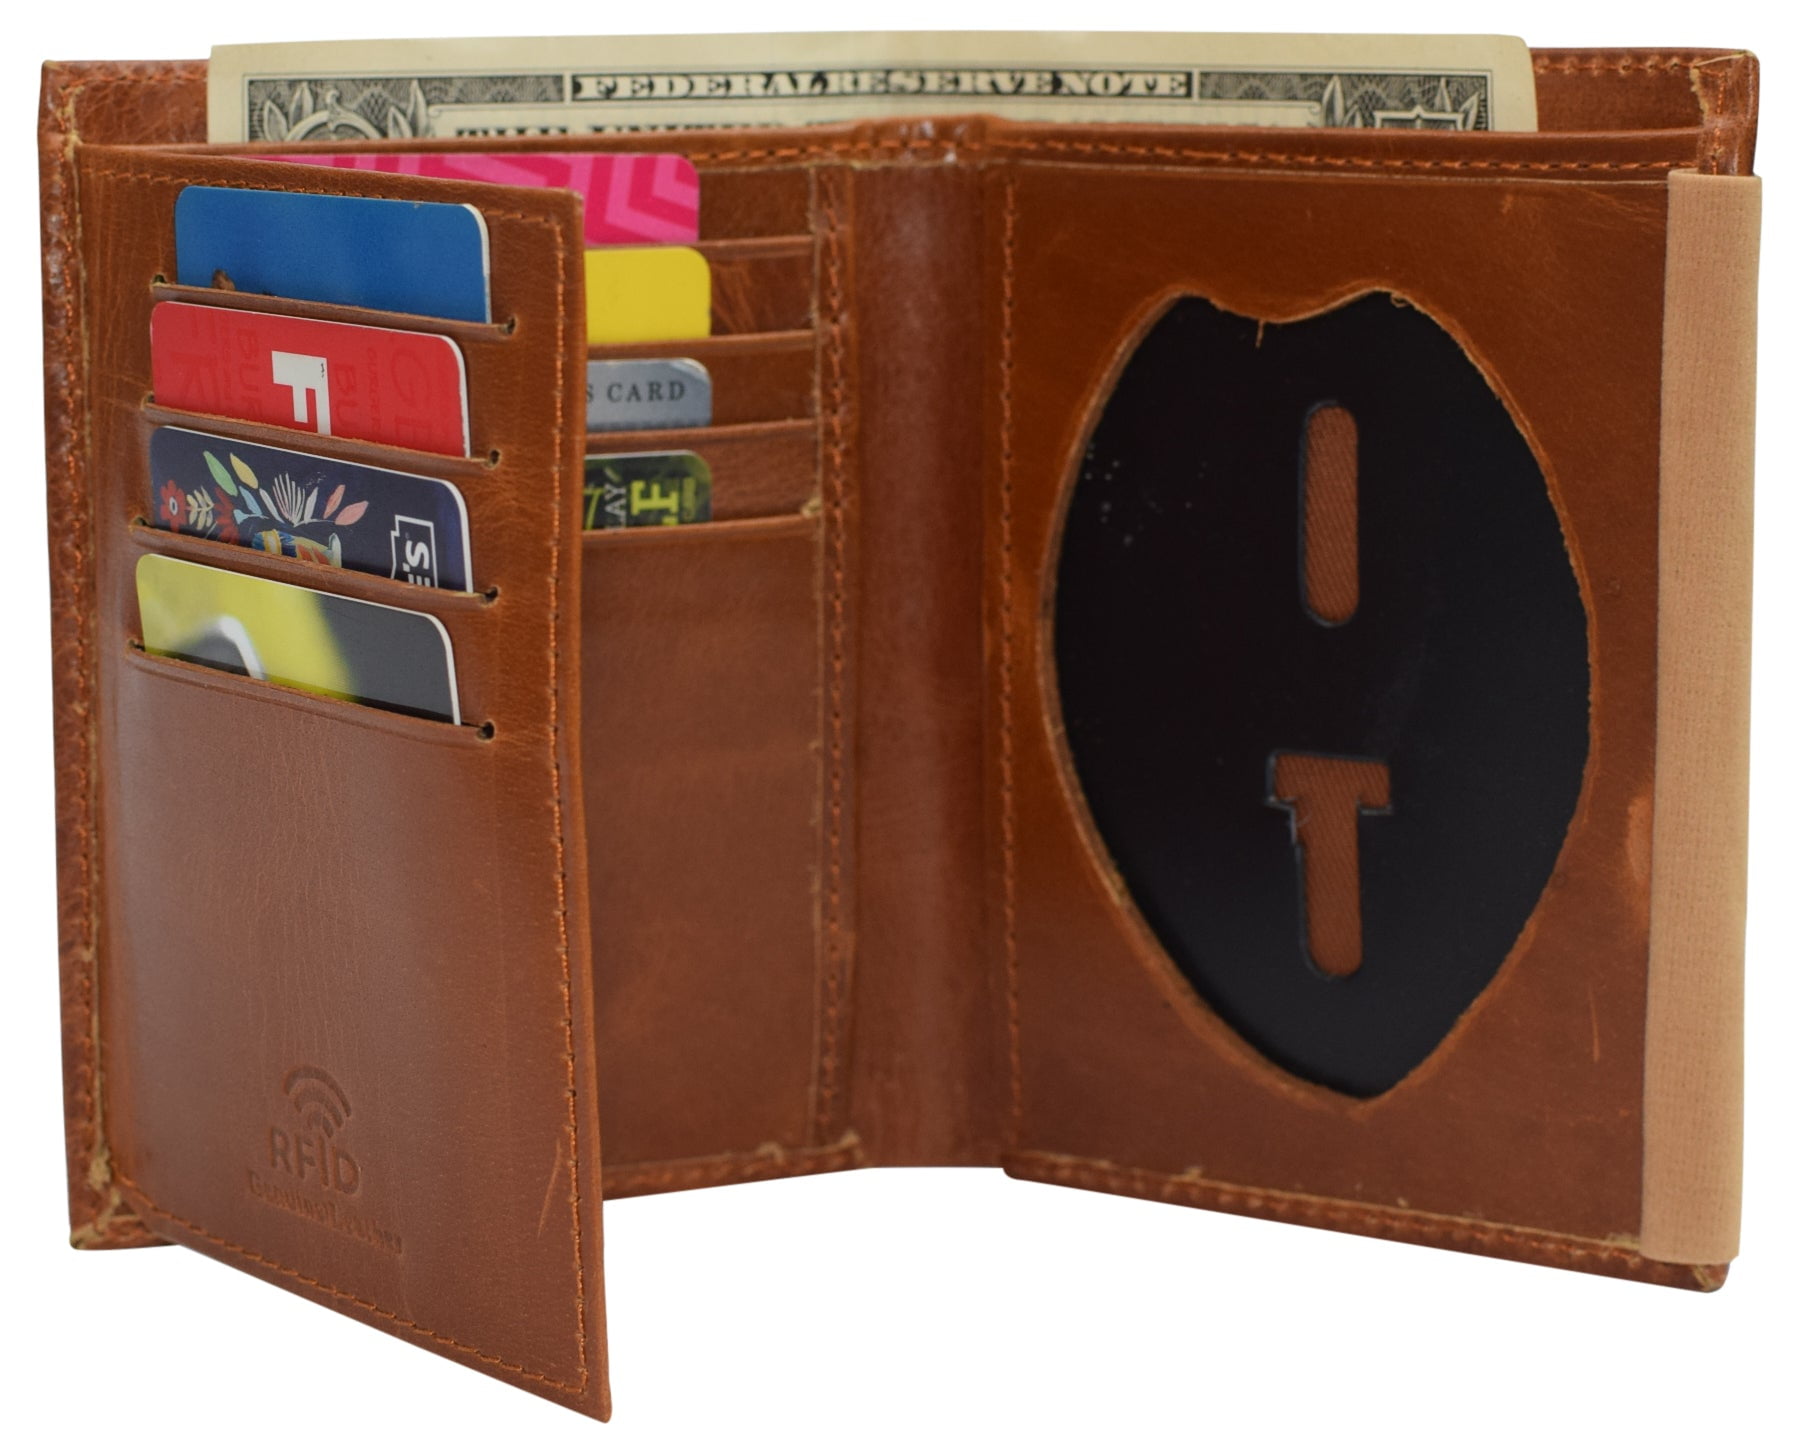 RFID Protected Luxury Leather Money Clip Wallet For Men With Card Holders, ID Slot, Currency Clip and Currency Slot - Tan